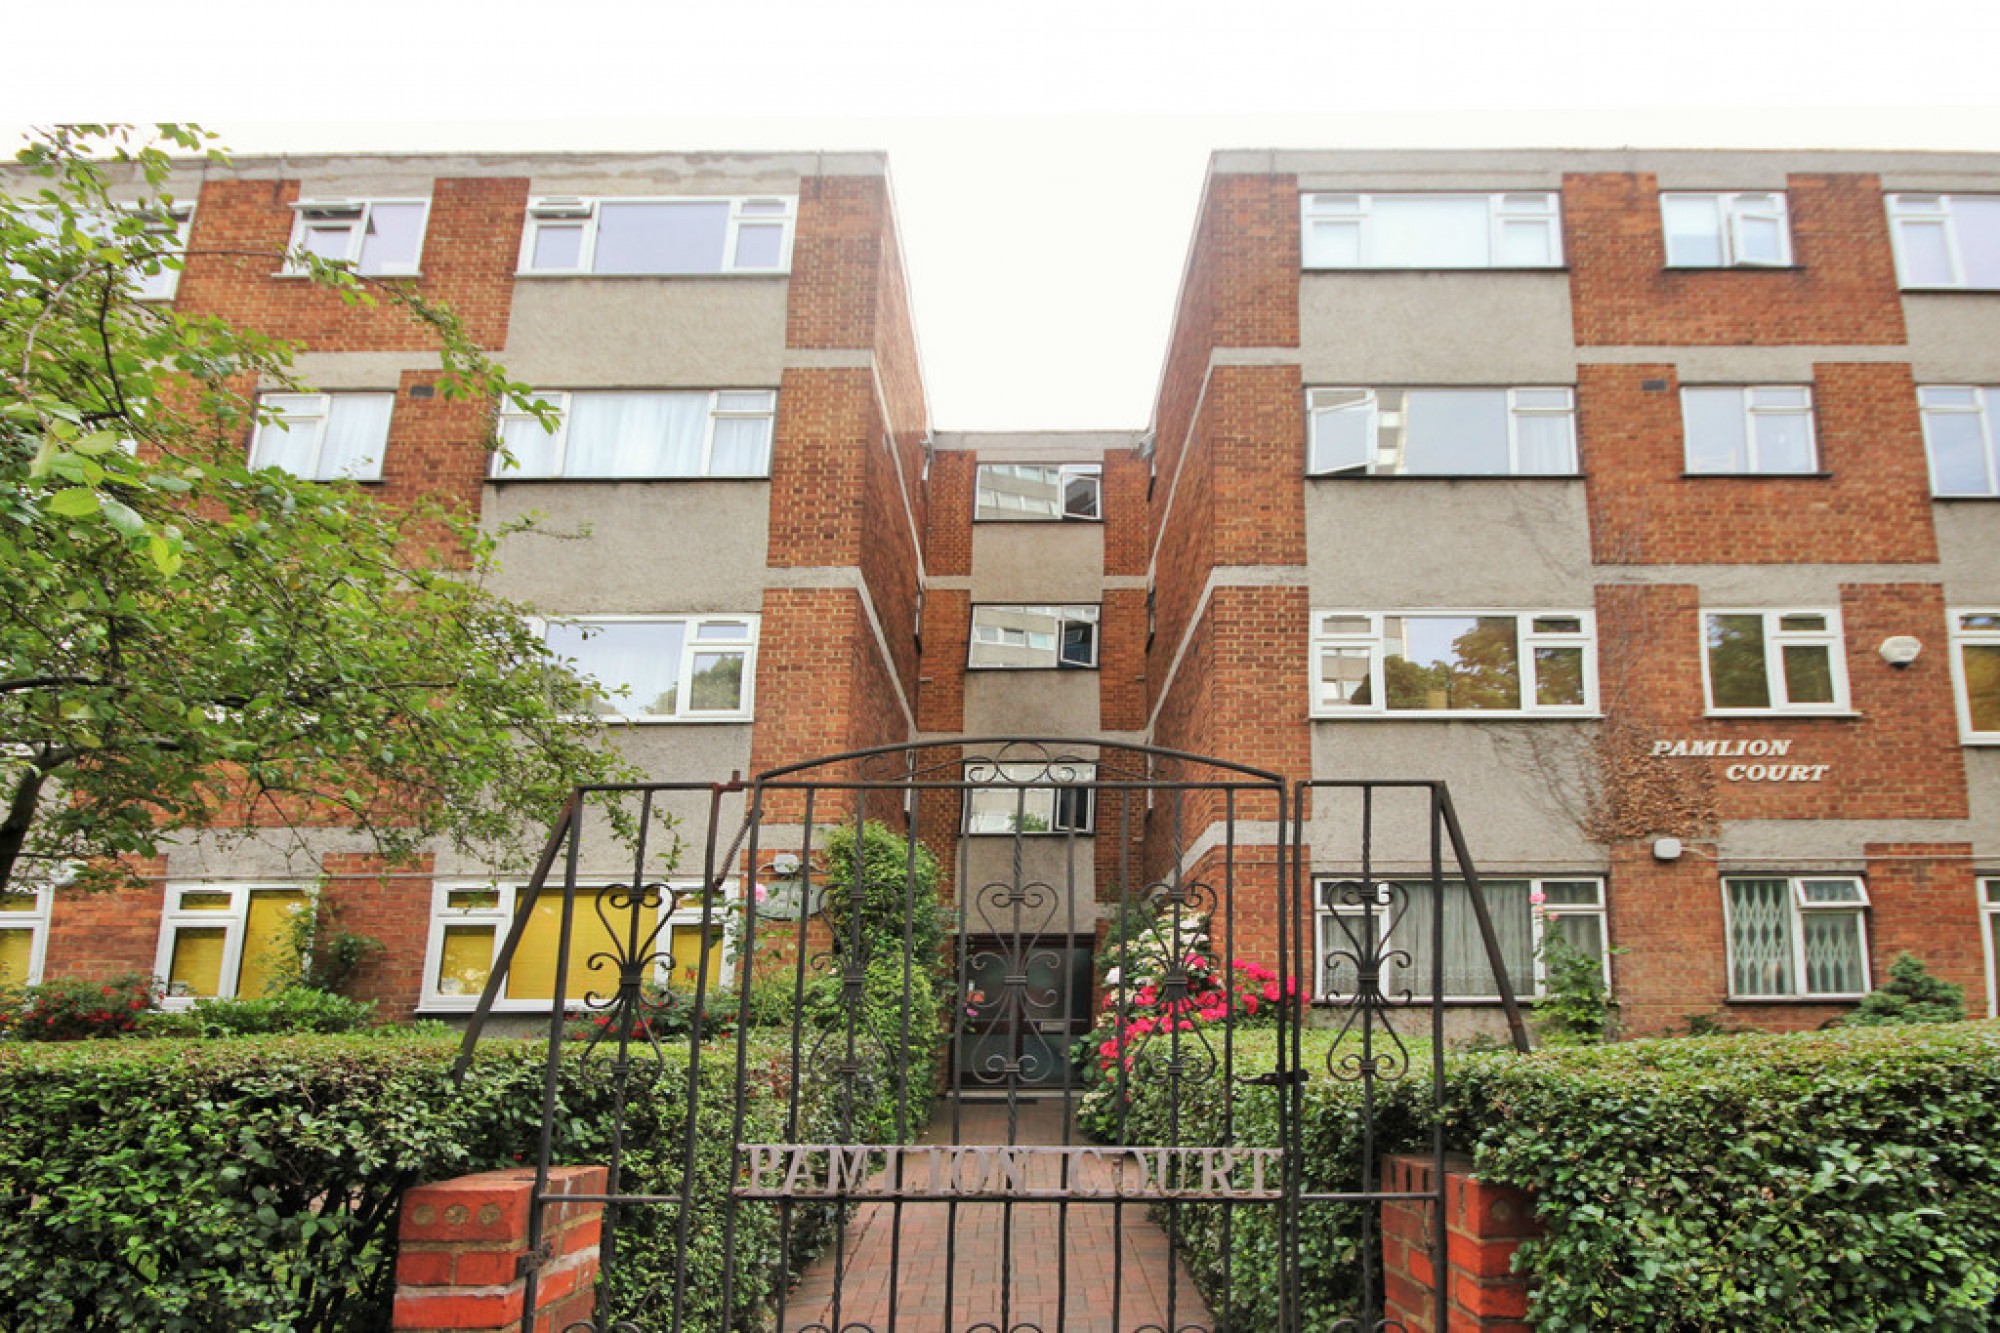 Pamlion court ,Crouch Hill N4 4AL Recenlty let more required